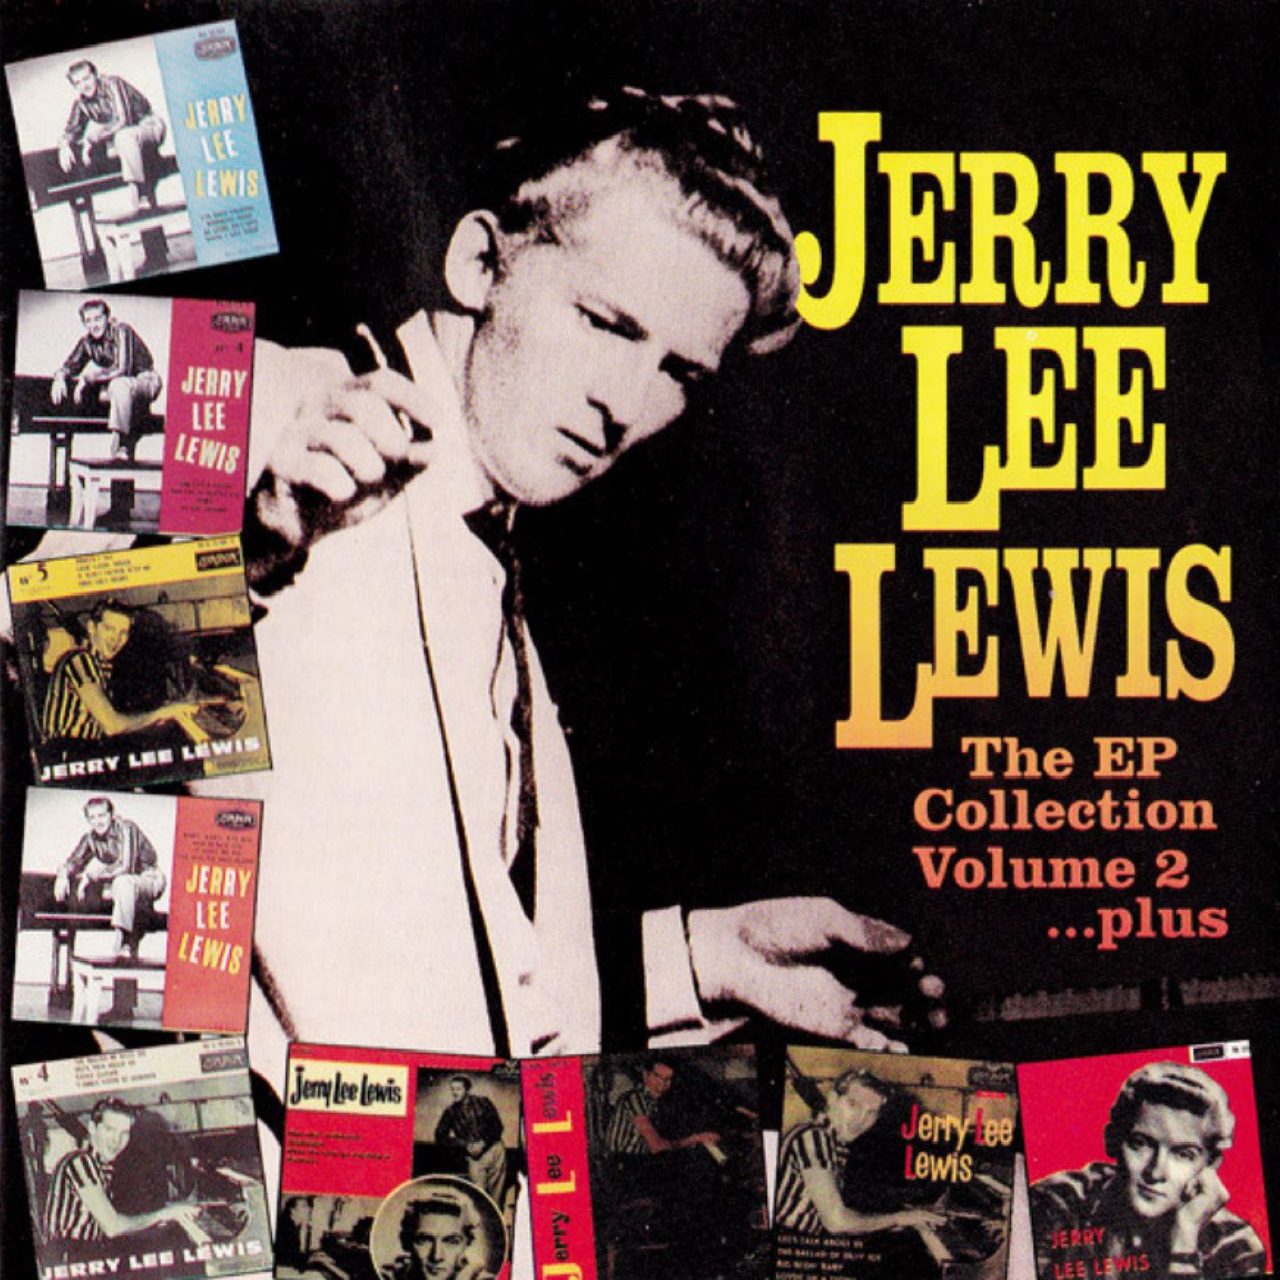 Jerry Lee Lewis – The EP Collection Volume 2… Plus cover album